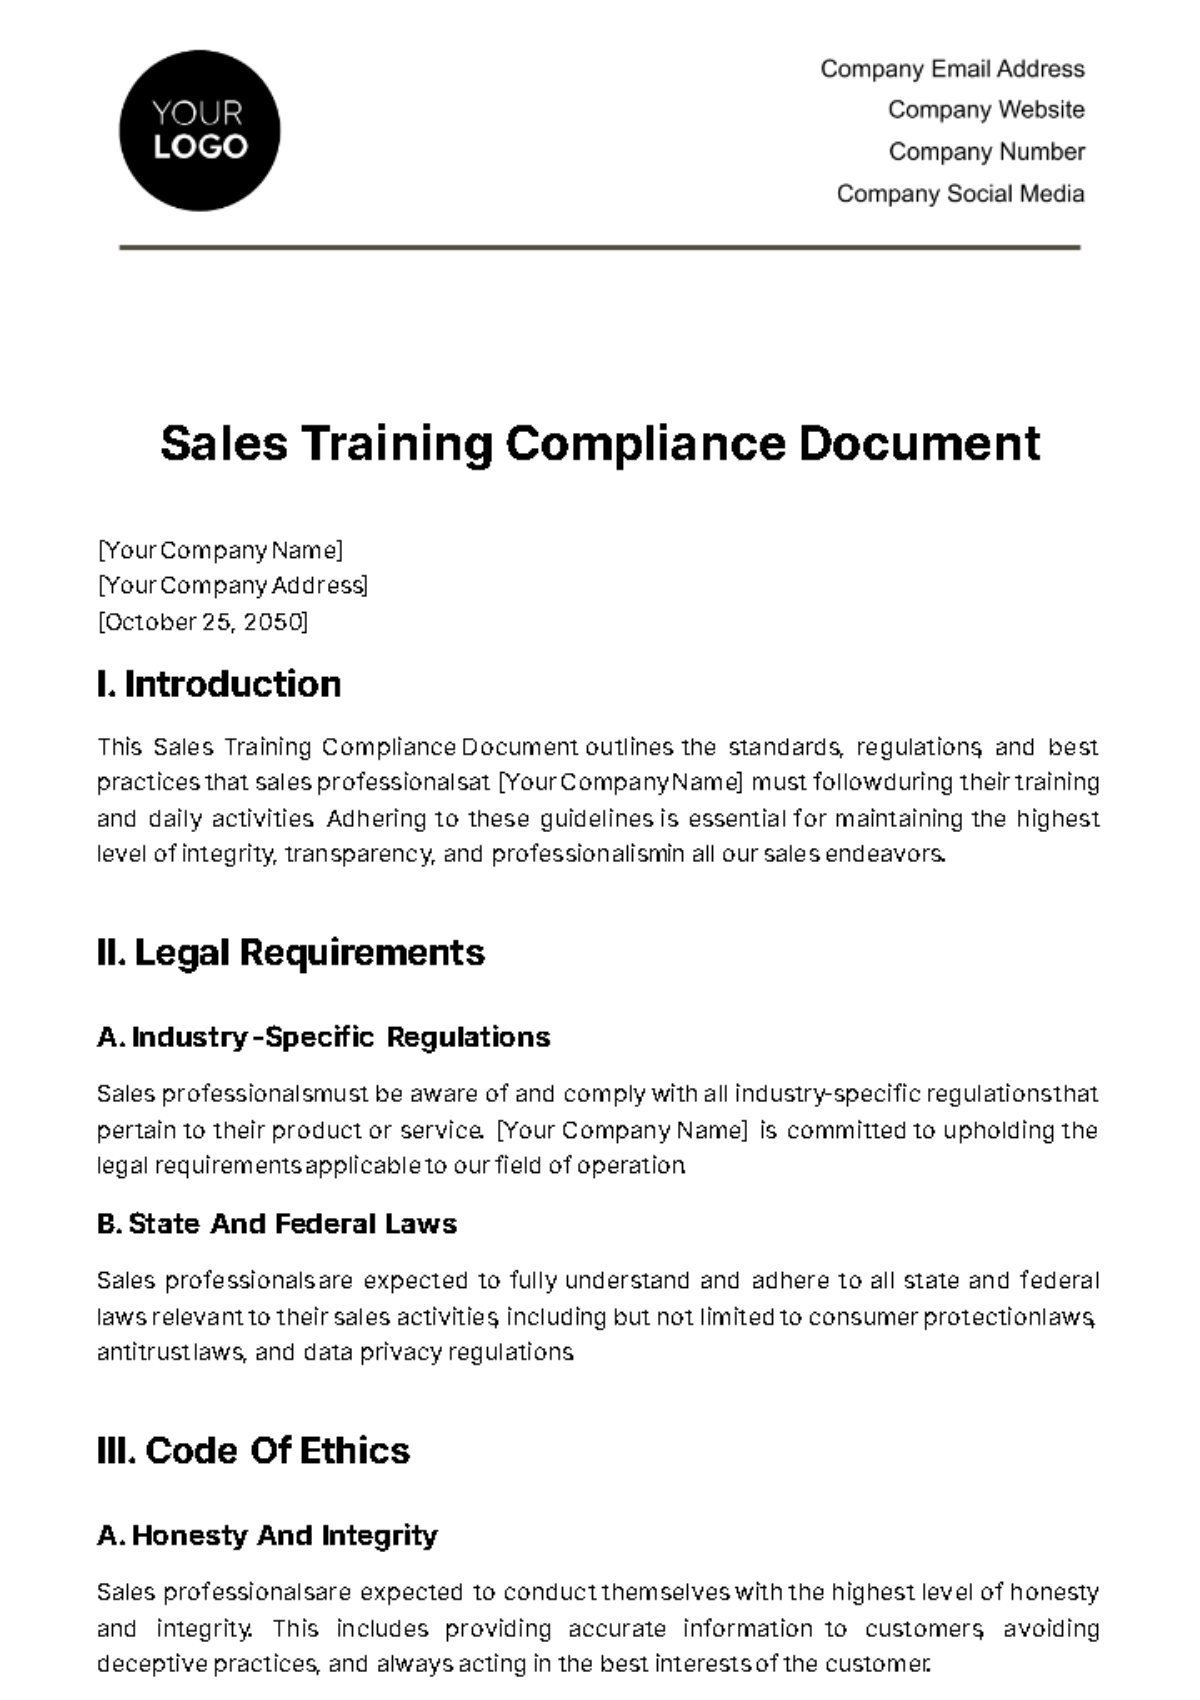 Free Sales Training Compliance Document Template